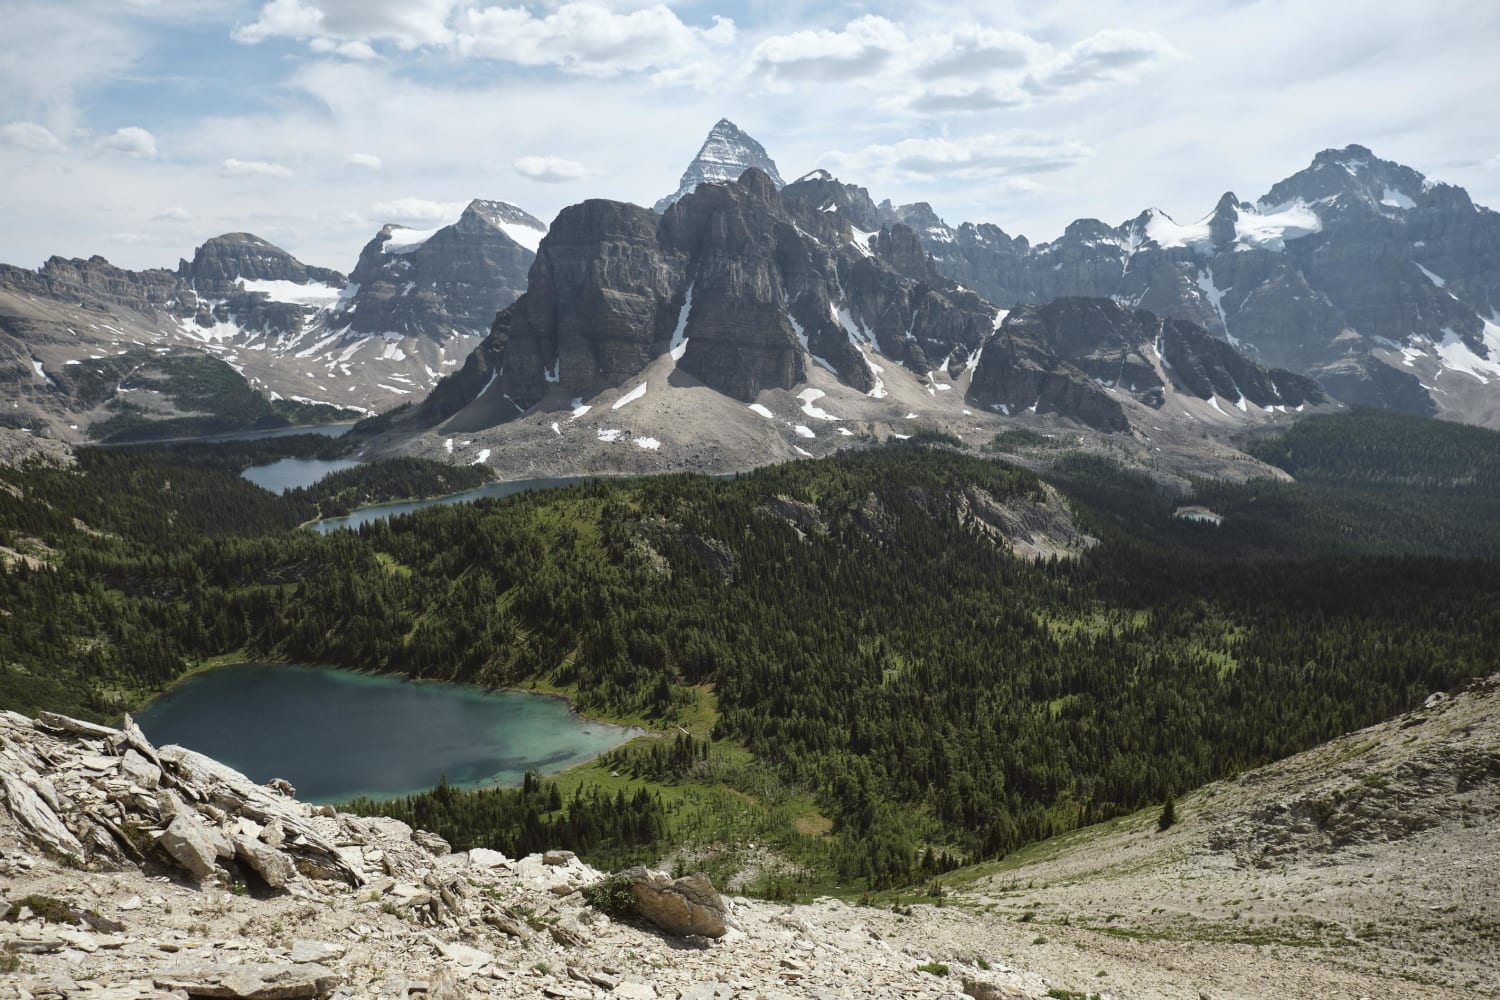 Here's some Rockies to balance out all the Tetons - Assiniboine Park